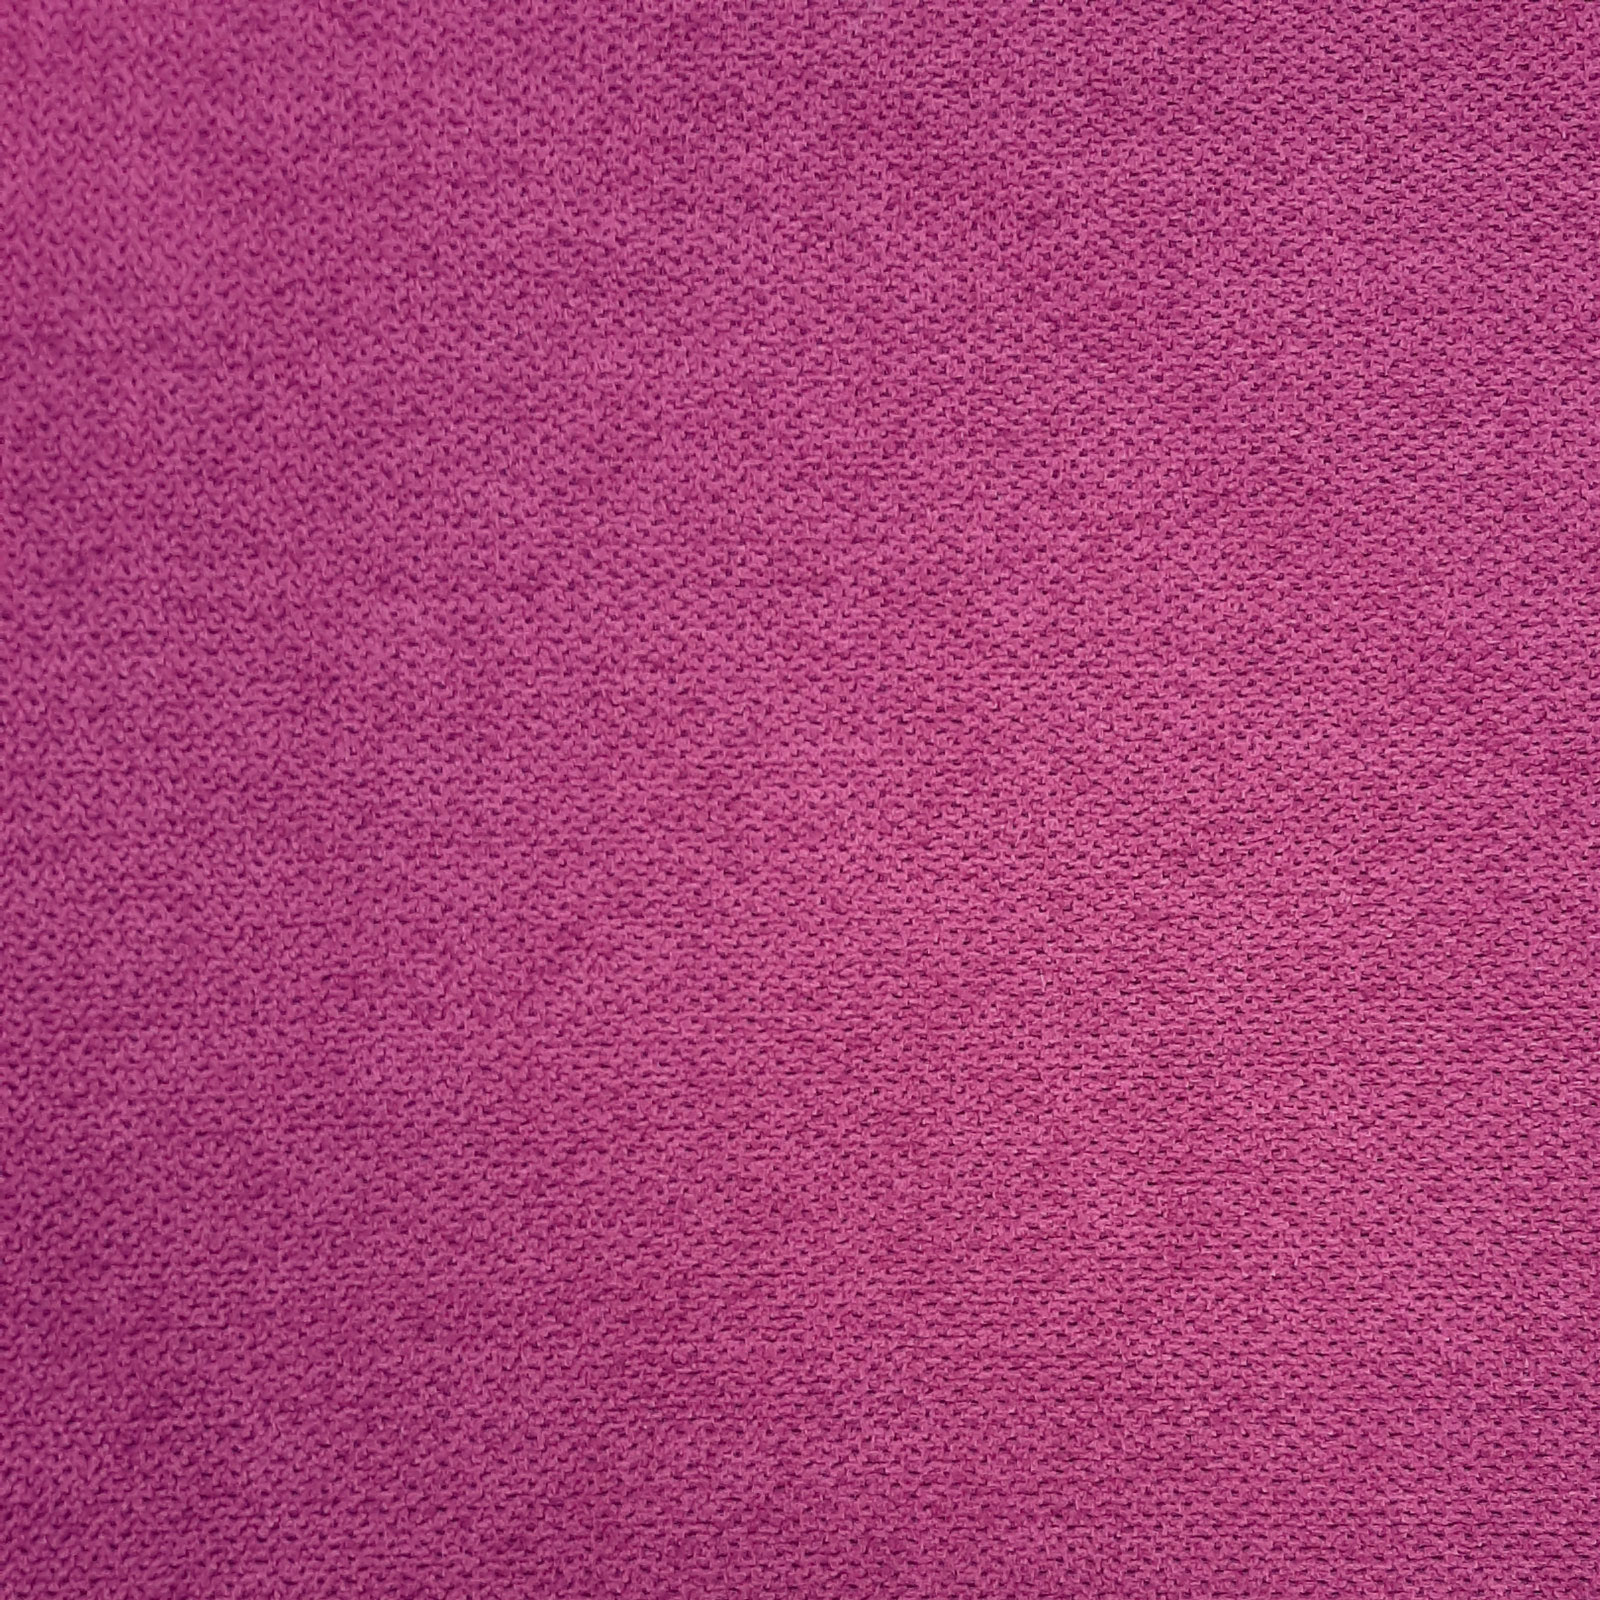 Deluxe - high-quality Oeko-Tex® upholstery fabric -Berry